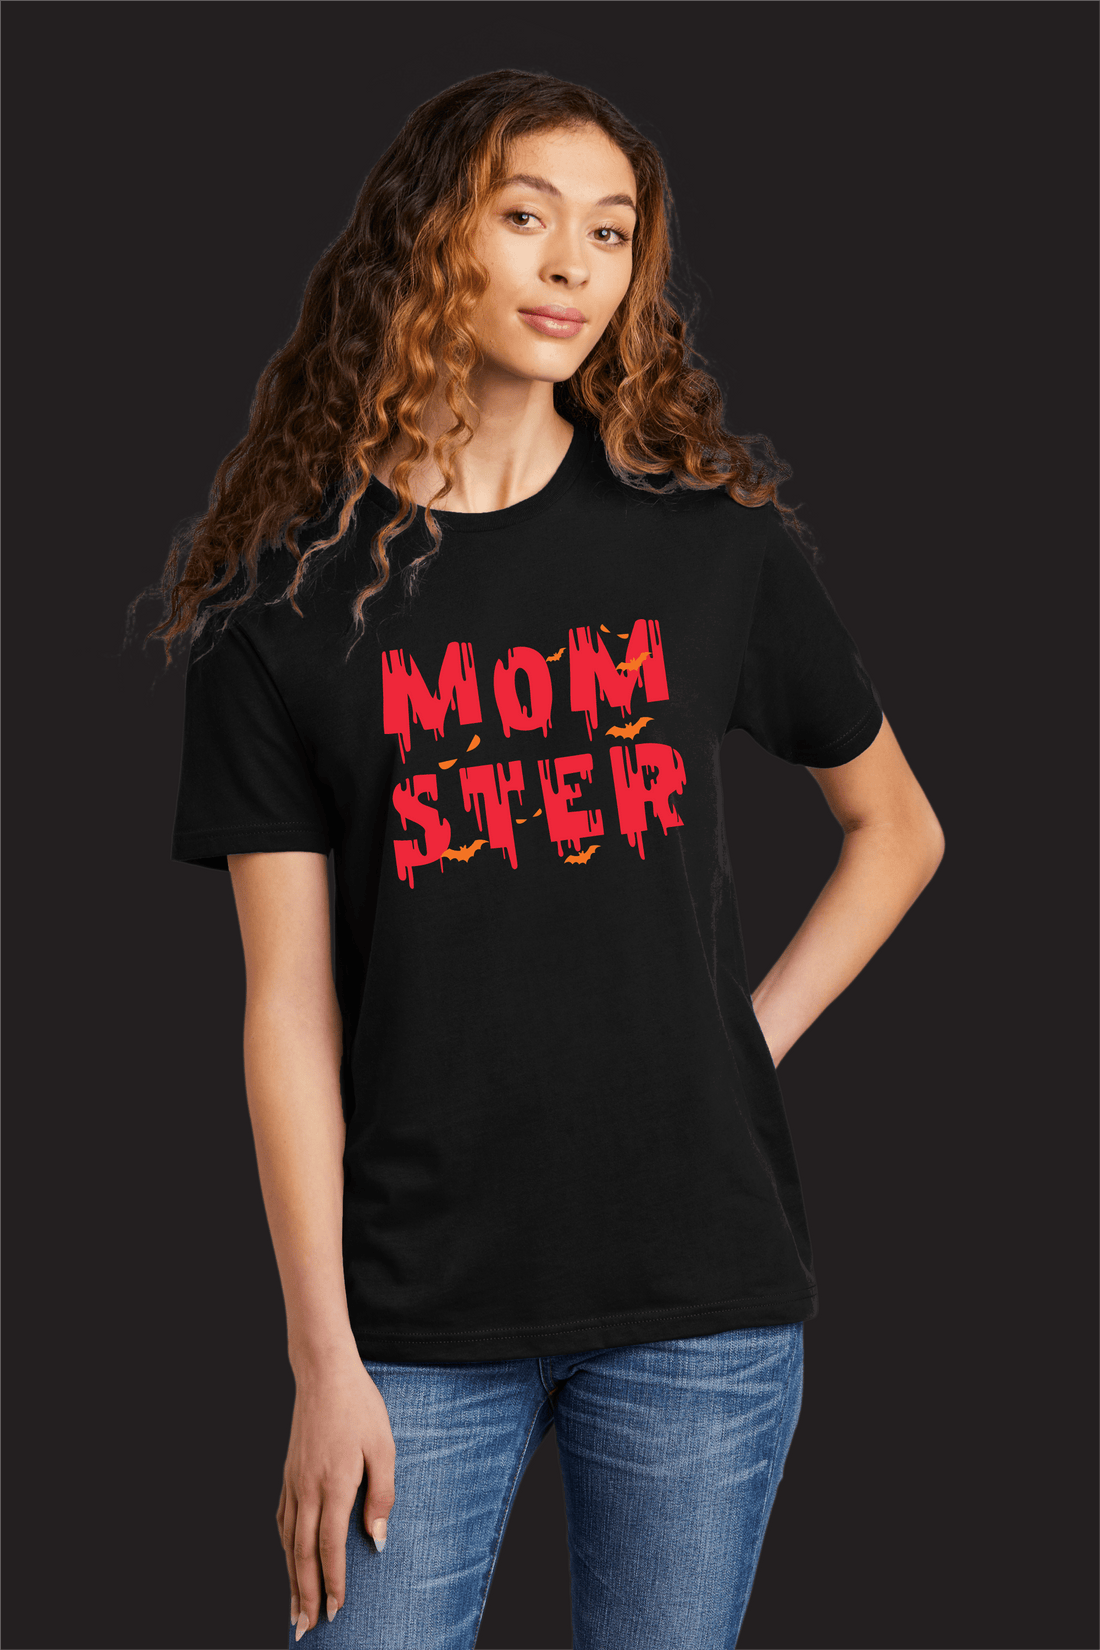 Beware of the MOMSTER!